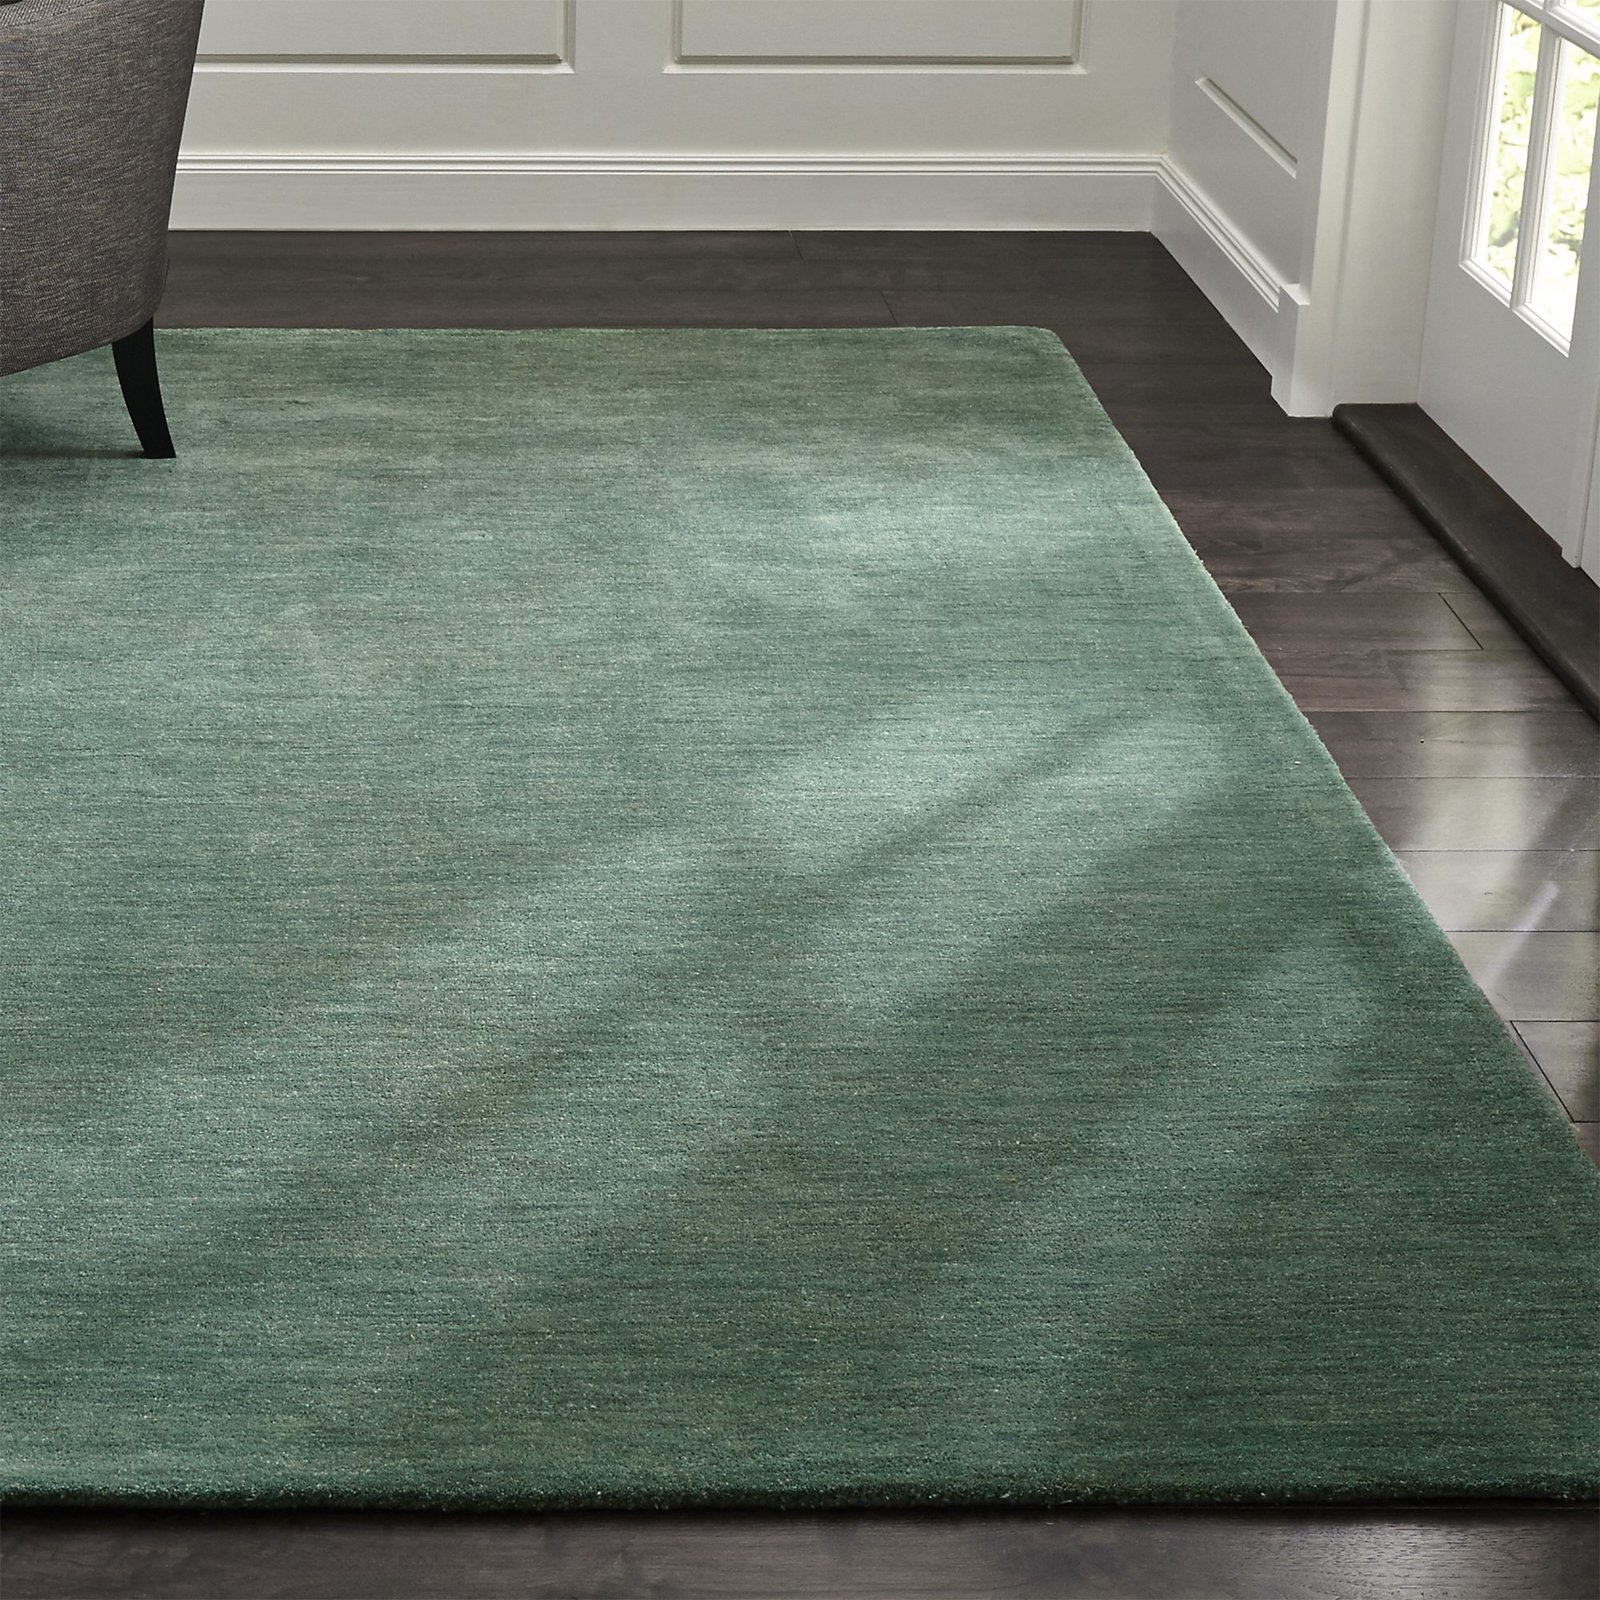 Primary image for Area Rugs 6' x 9' Baxter Jade Green Hand Tufted Crate & Barrel Woolen Carpet